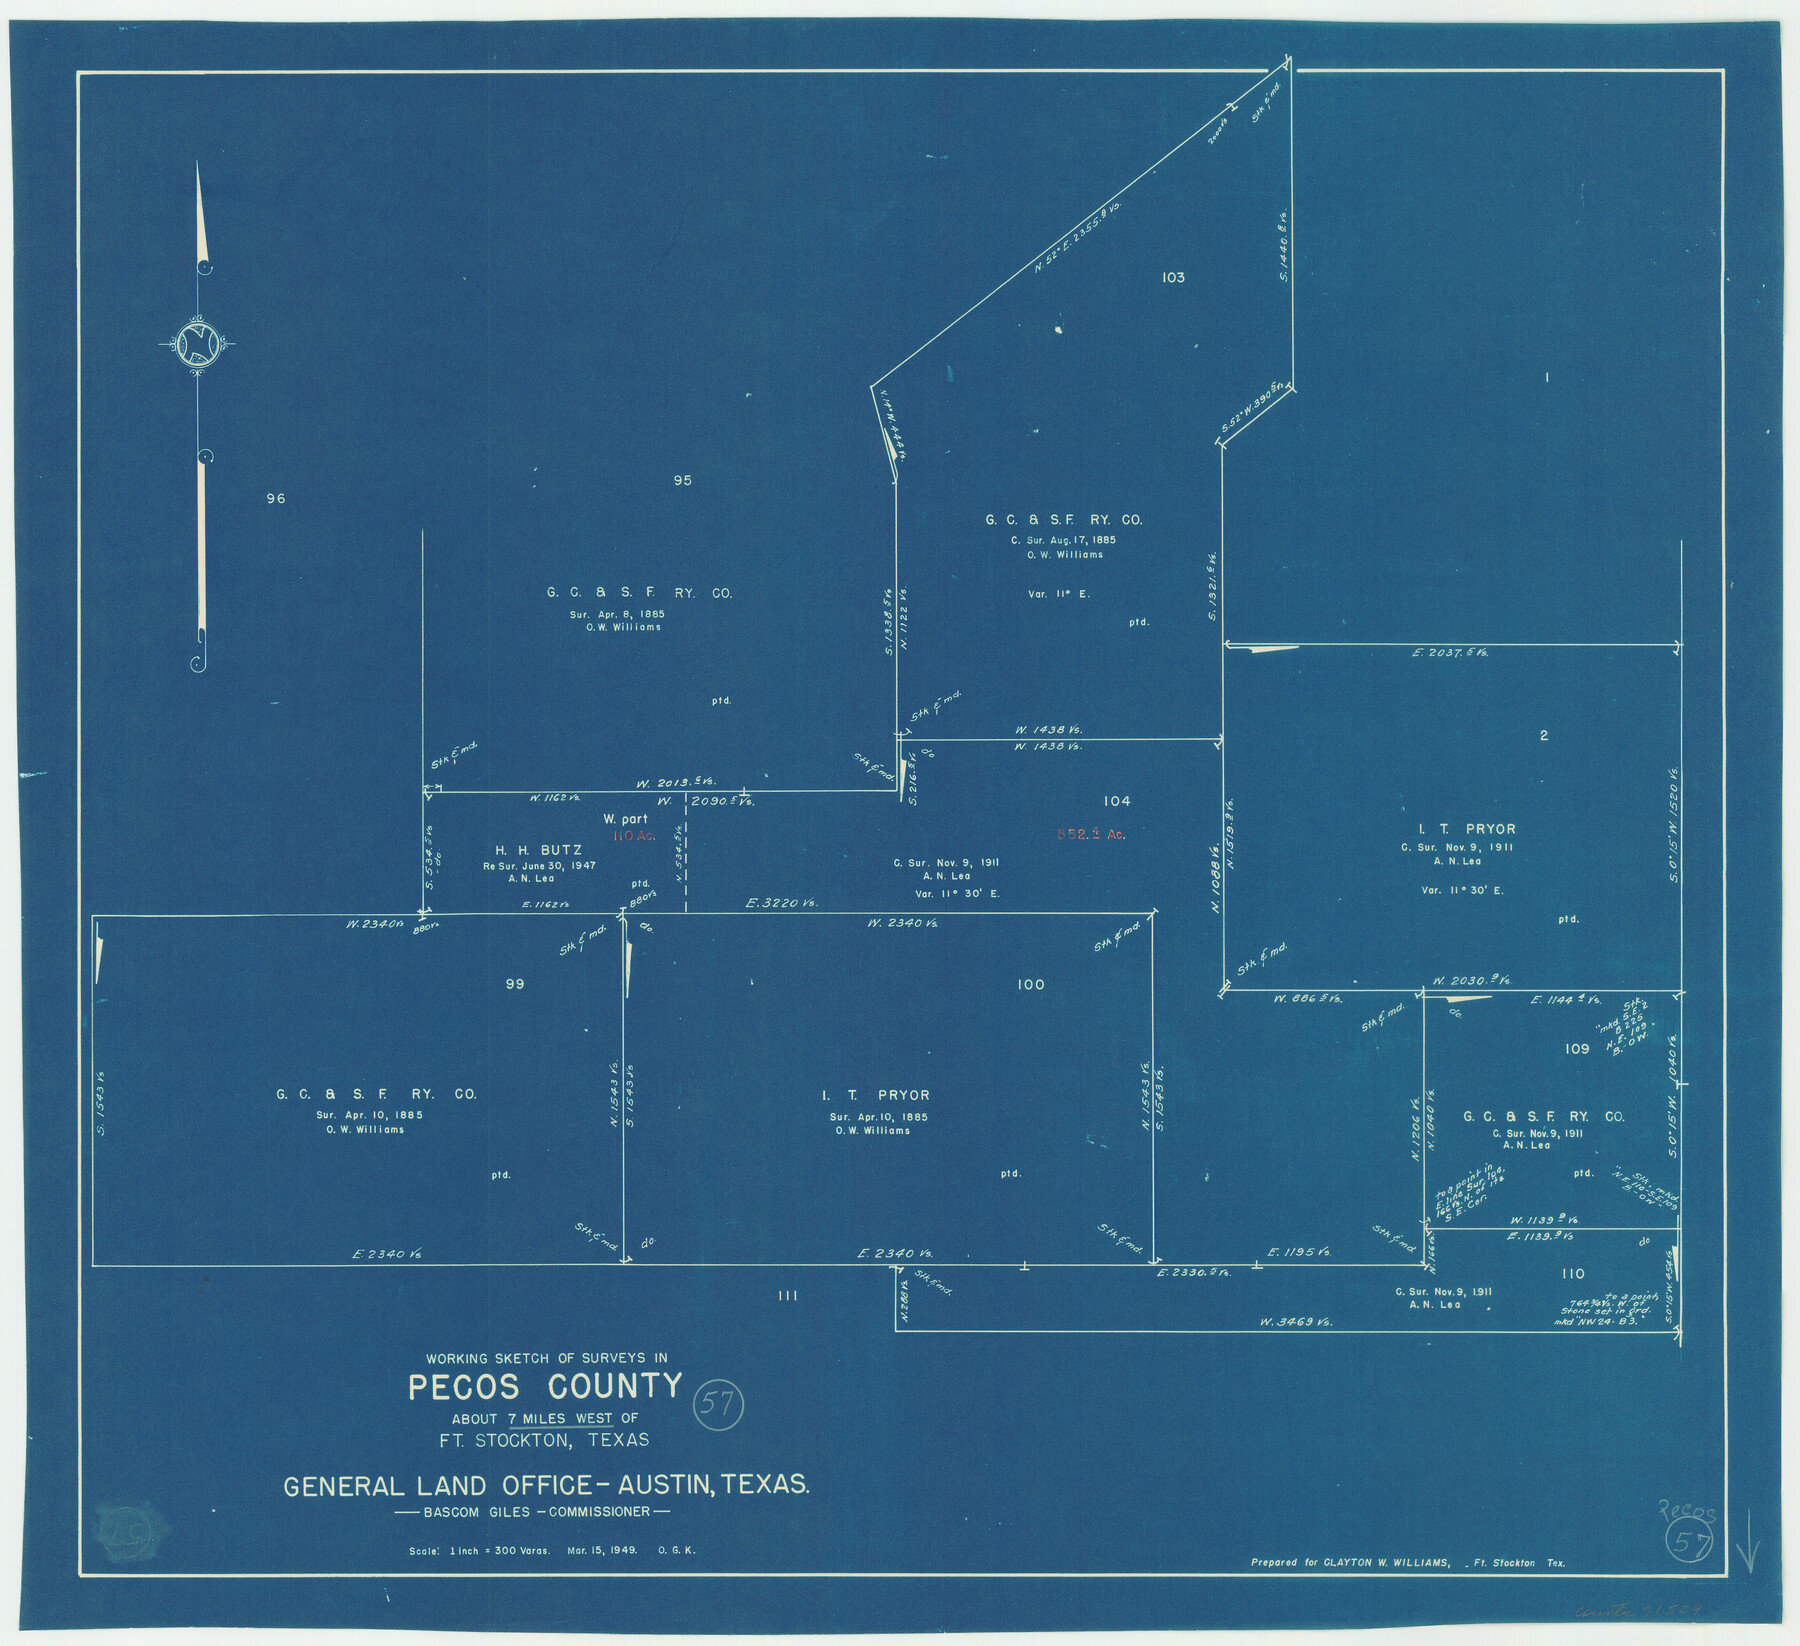 71529, Pecos County Working Sketch 57, General Map Collection